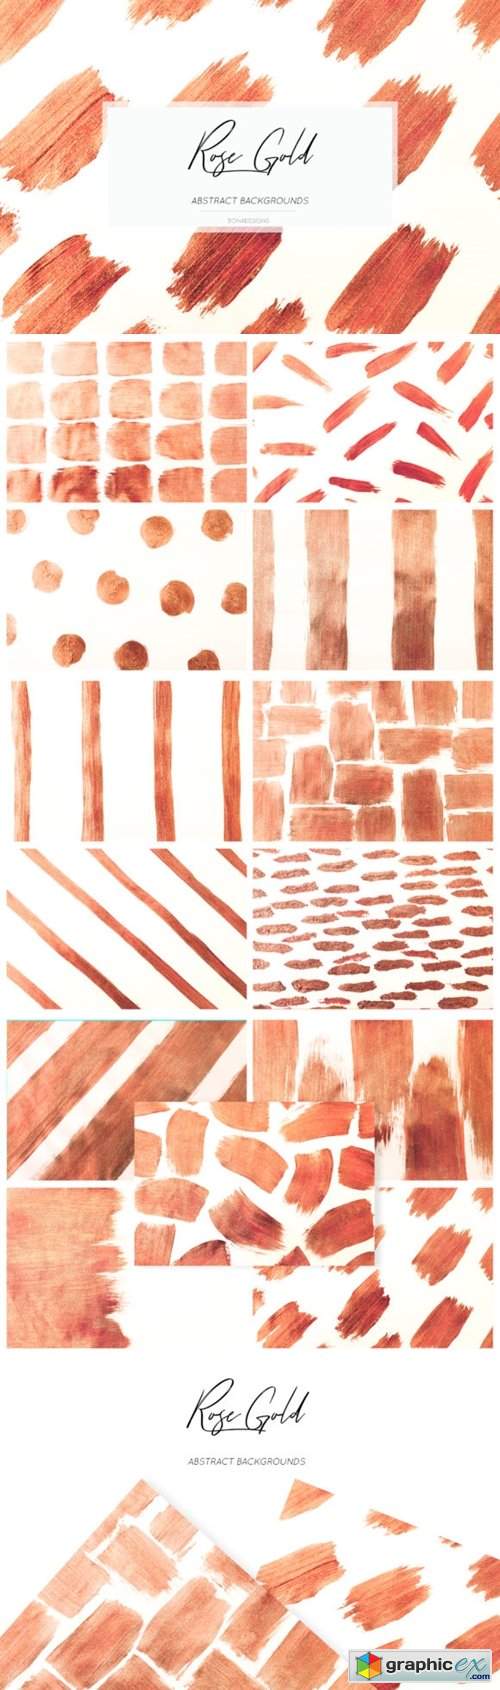 Rose Gold Abstract Backgrounds